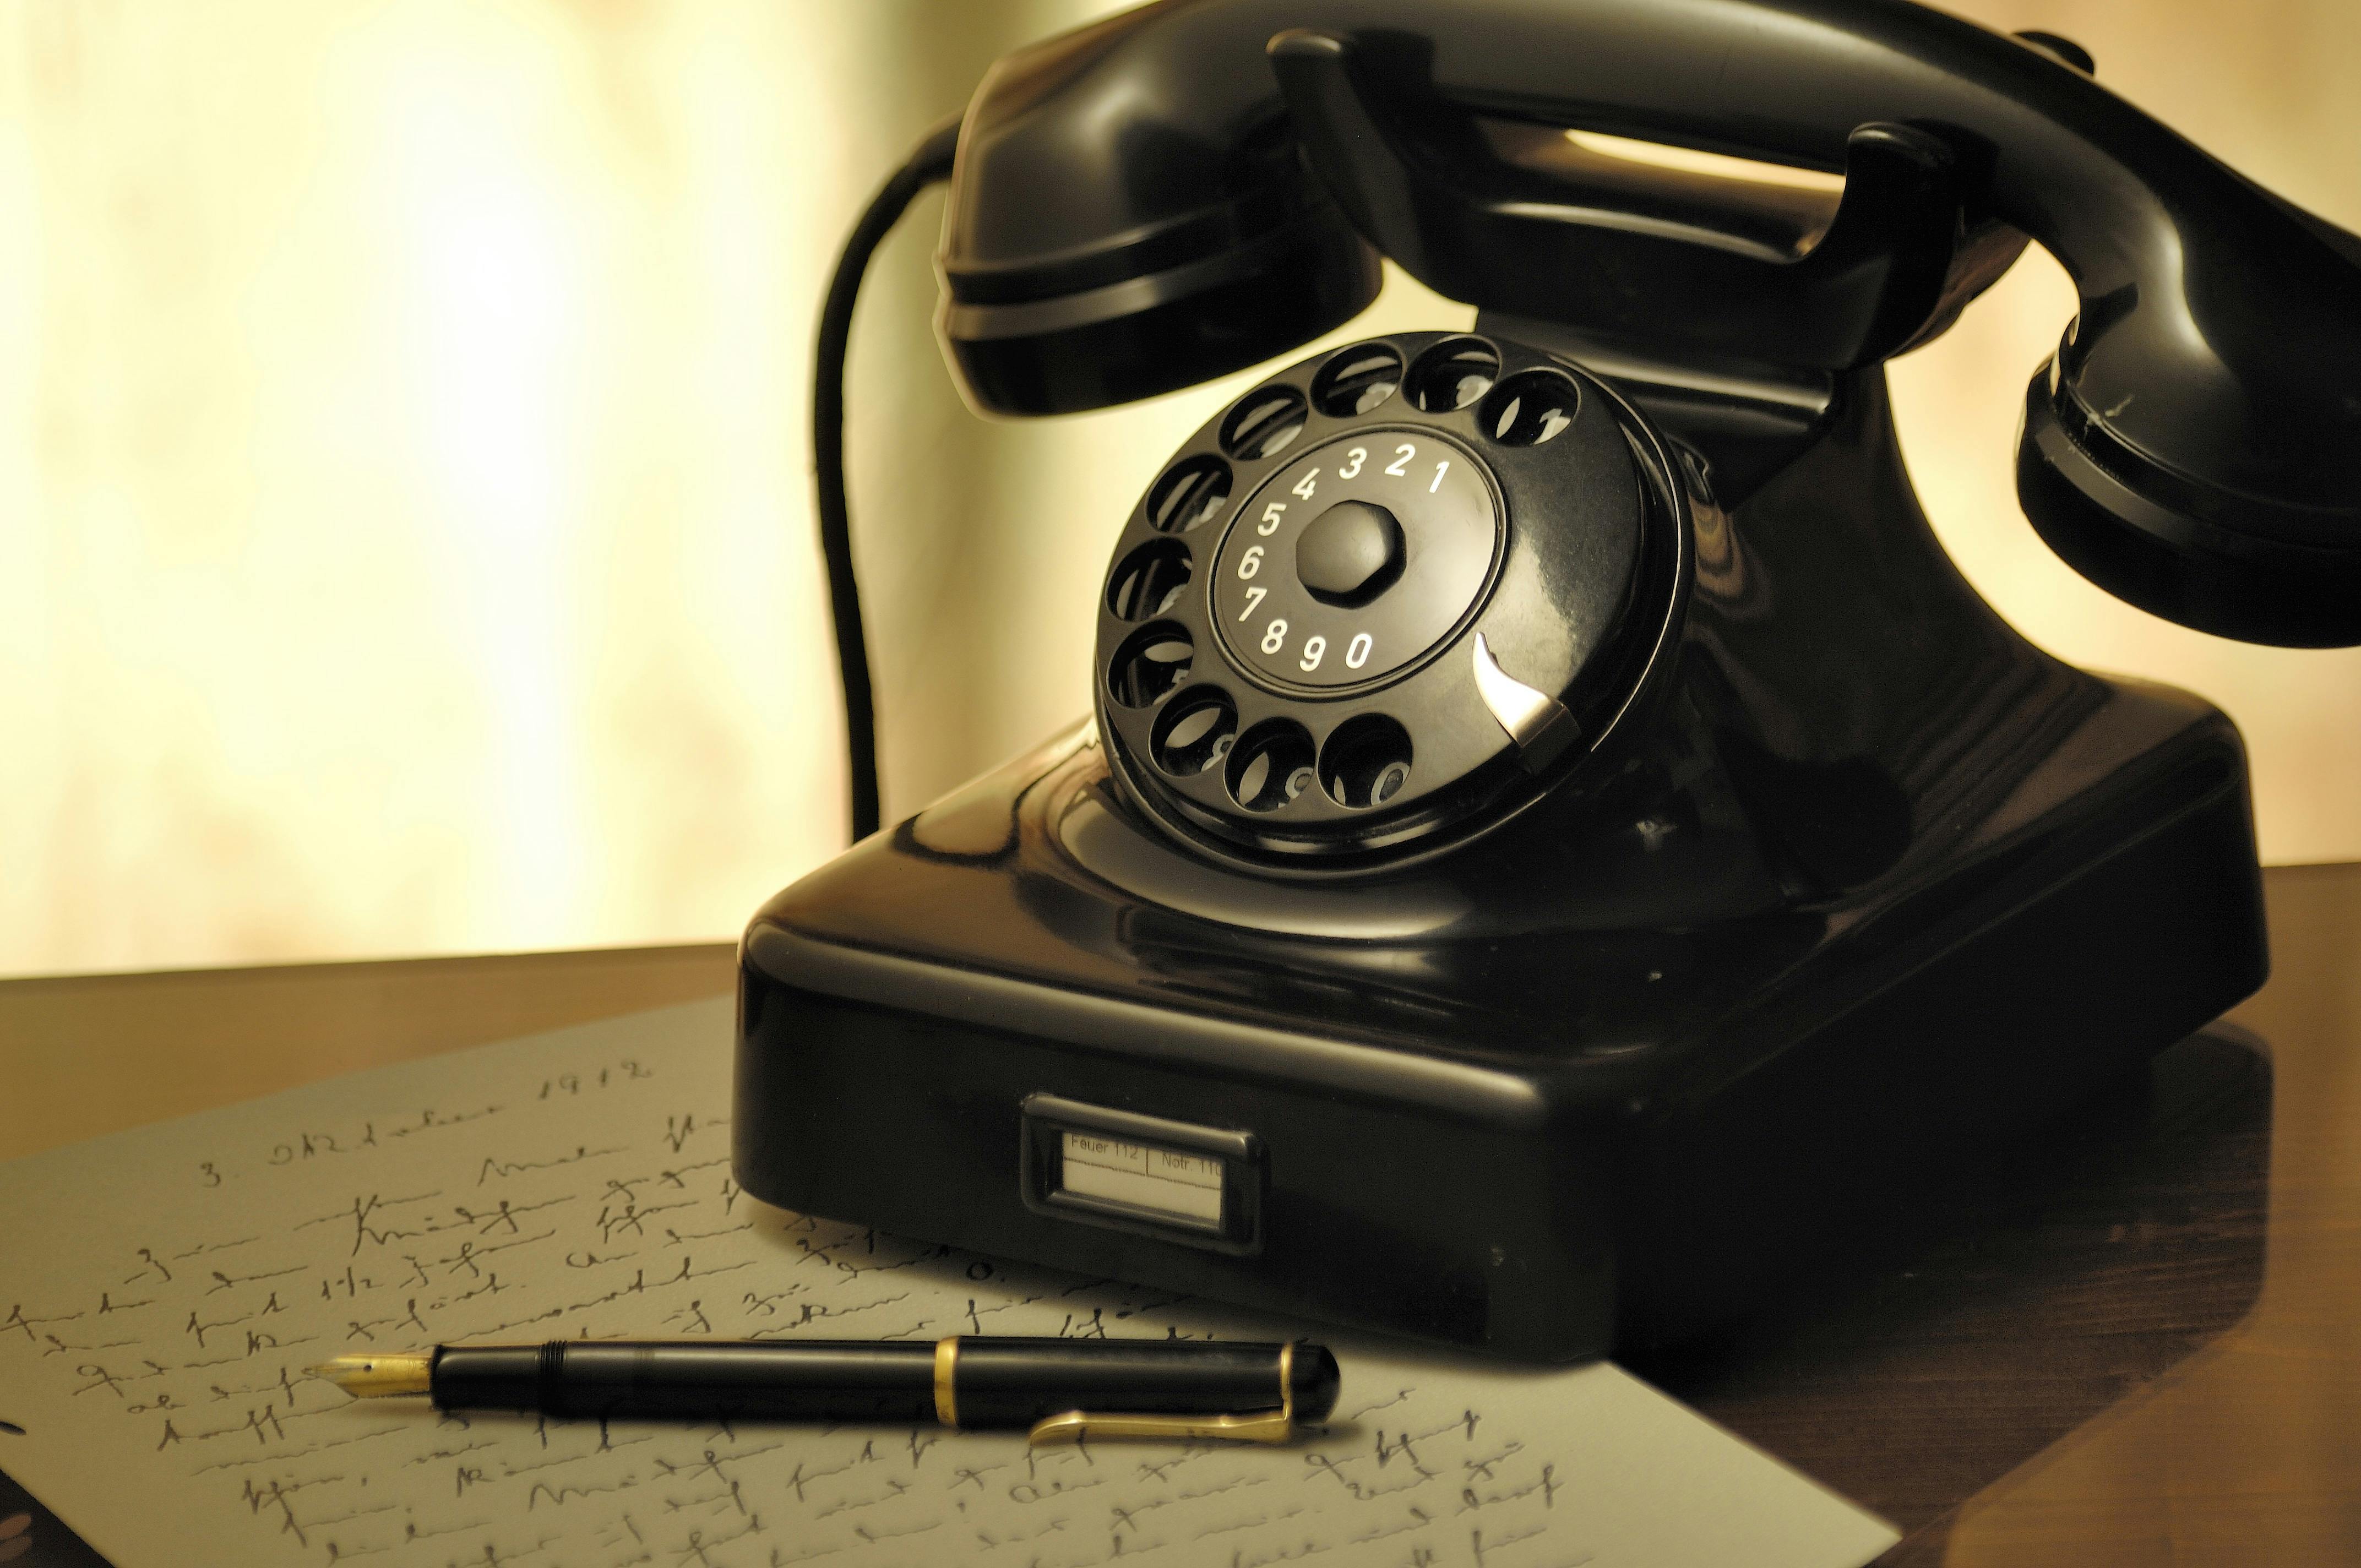 Picture of a telephone. | Photo: Pexels